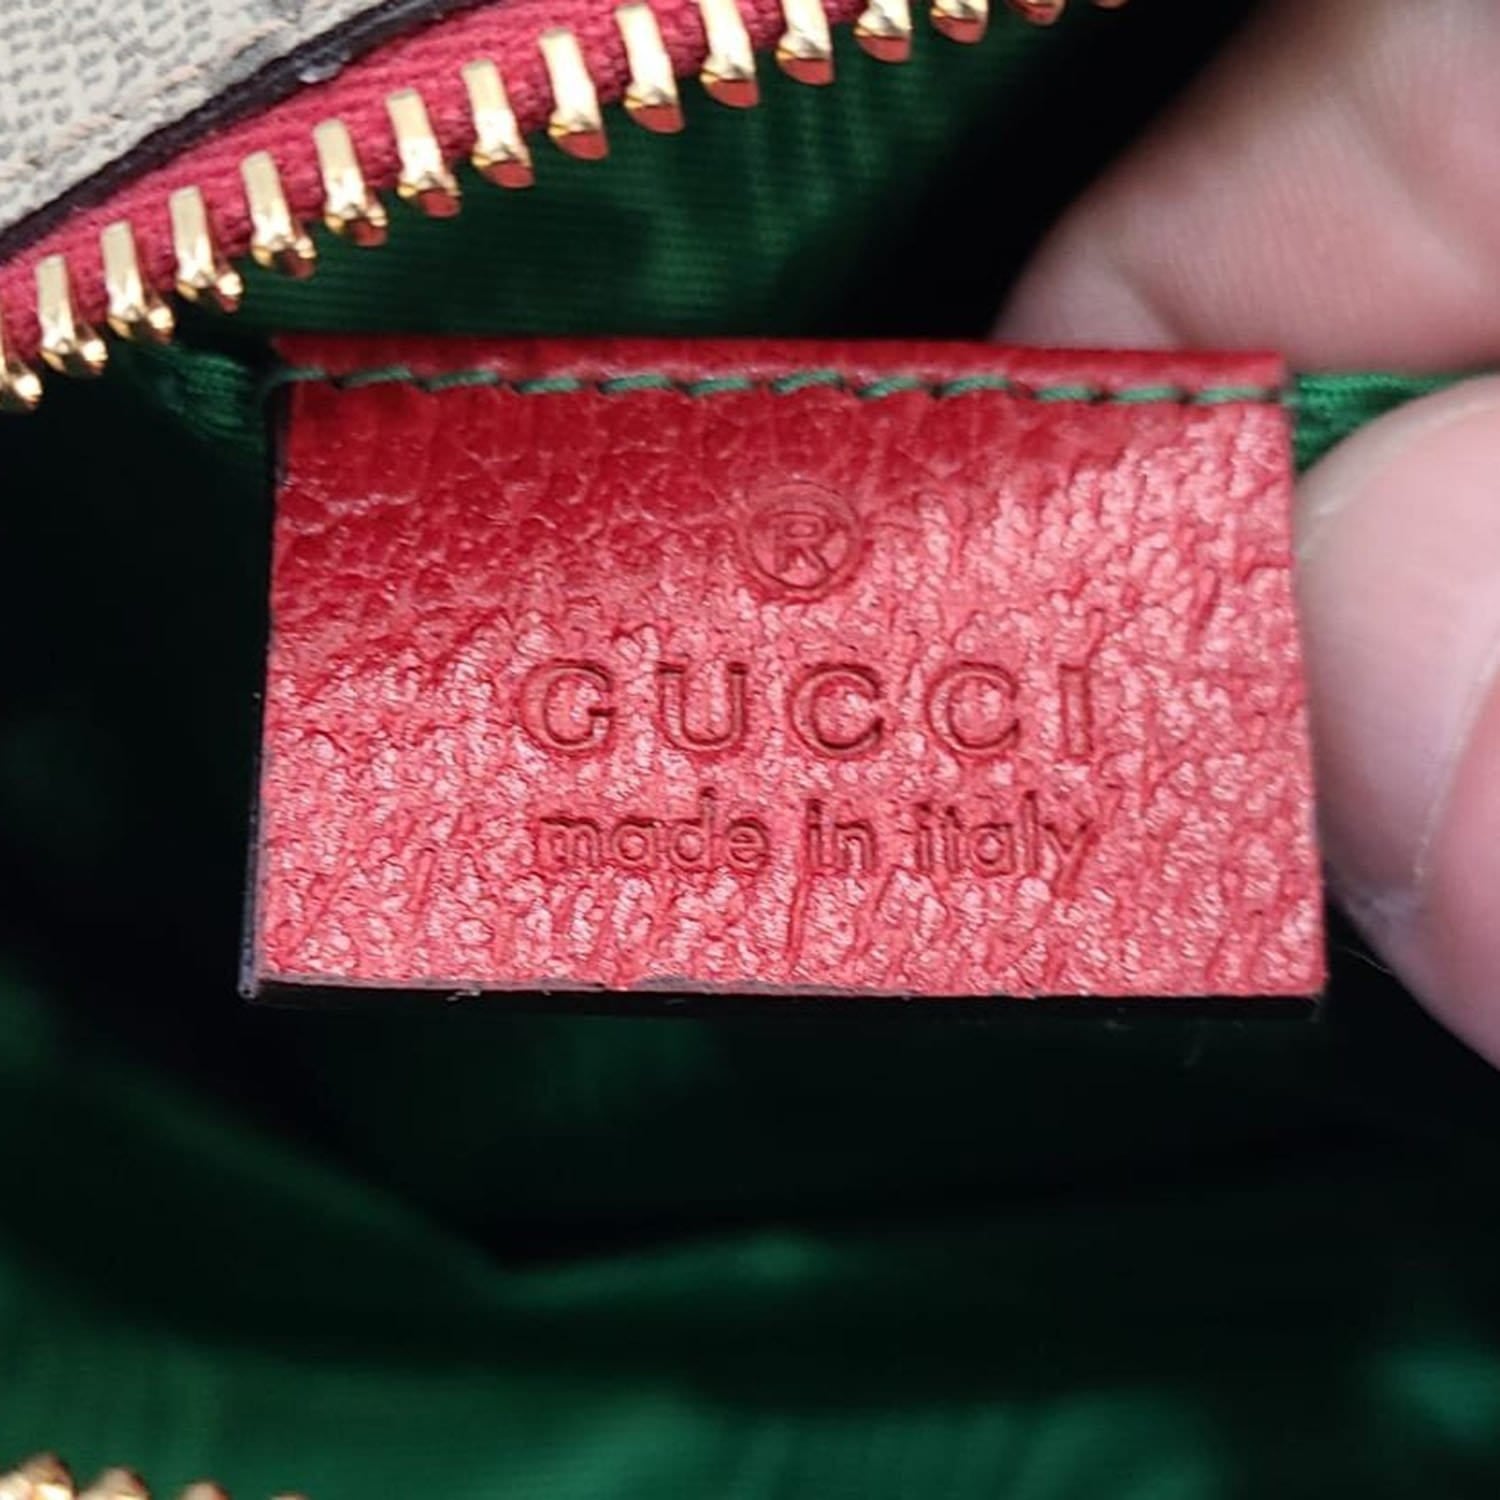 Gucci Store Clothing Tag Holder!!